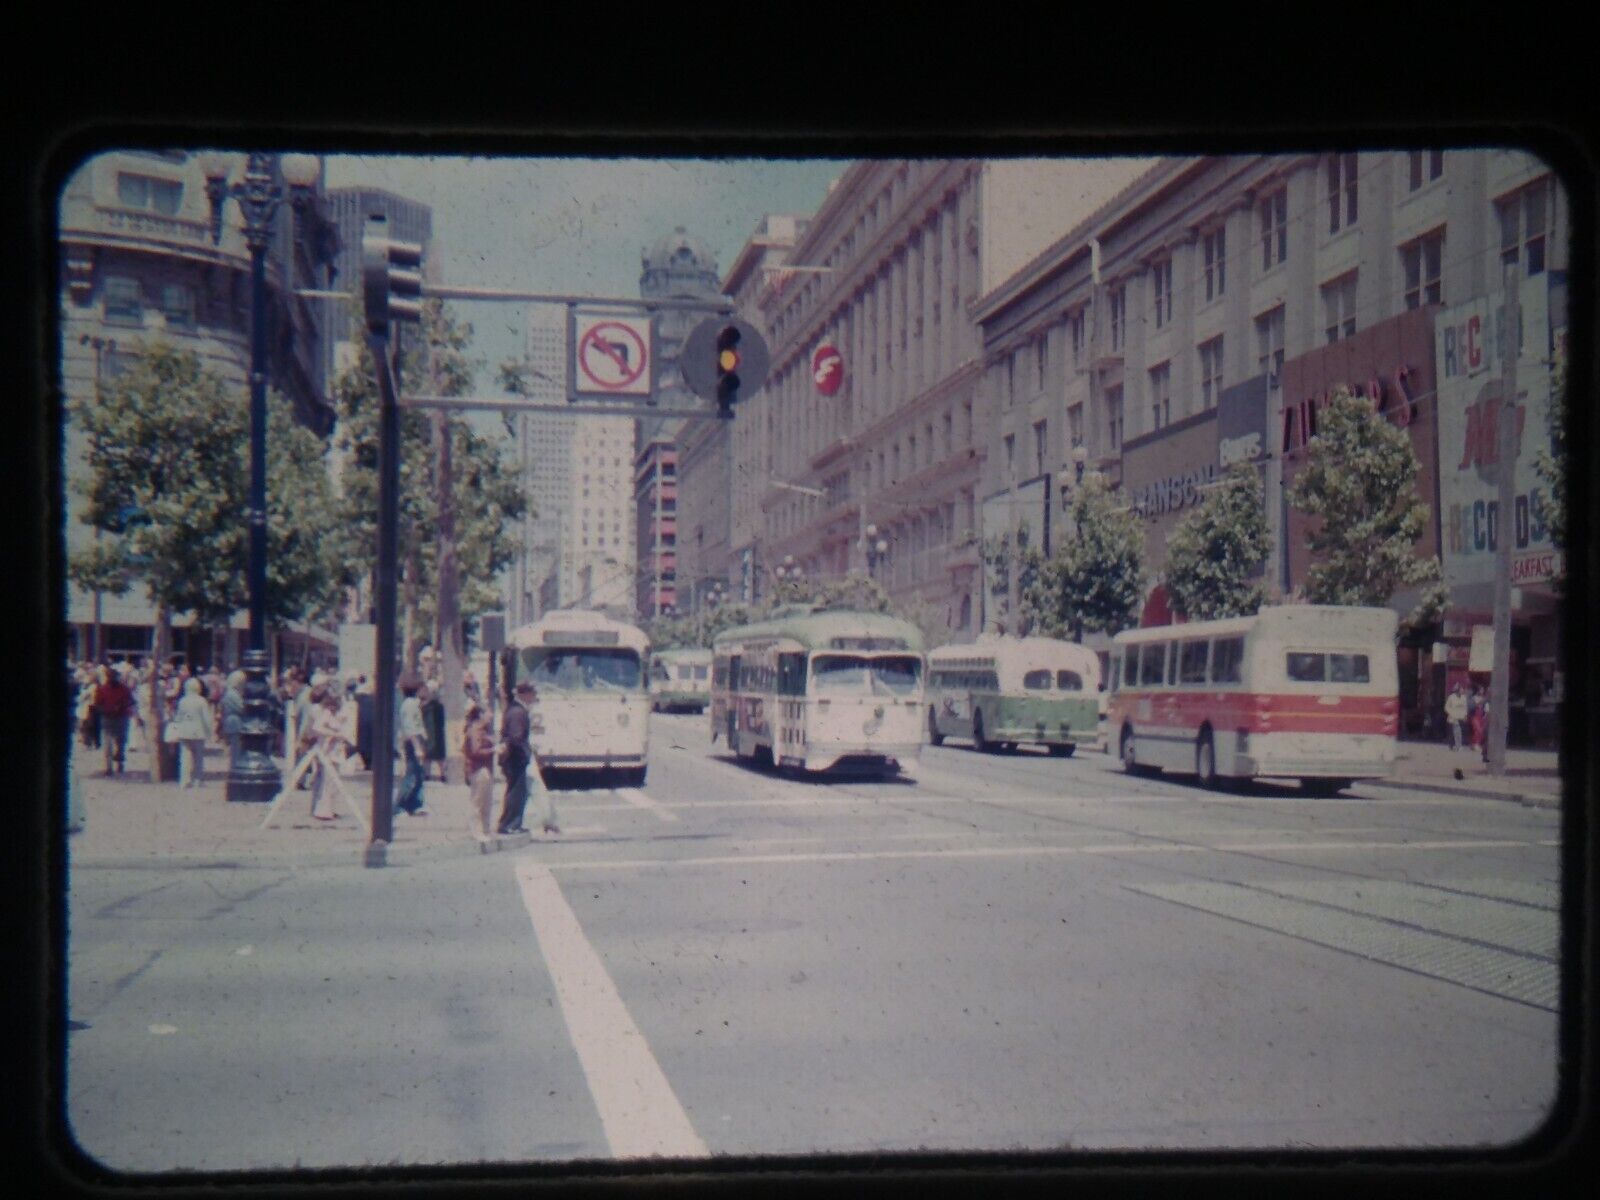 RH04 BUS, STREETCAR, SUBWAY TROLLY 35MM slide BUSSES ON BUSY STREET AUG 75 BBBBB